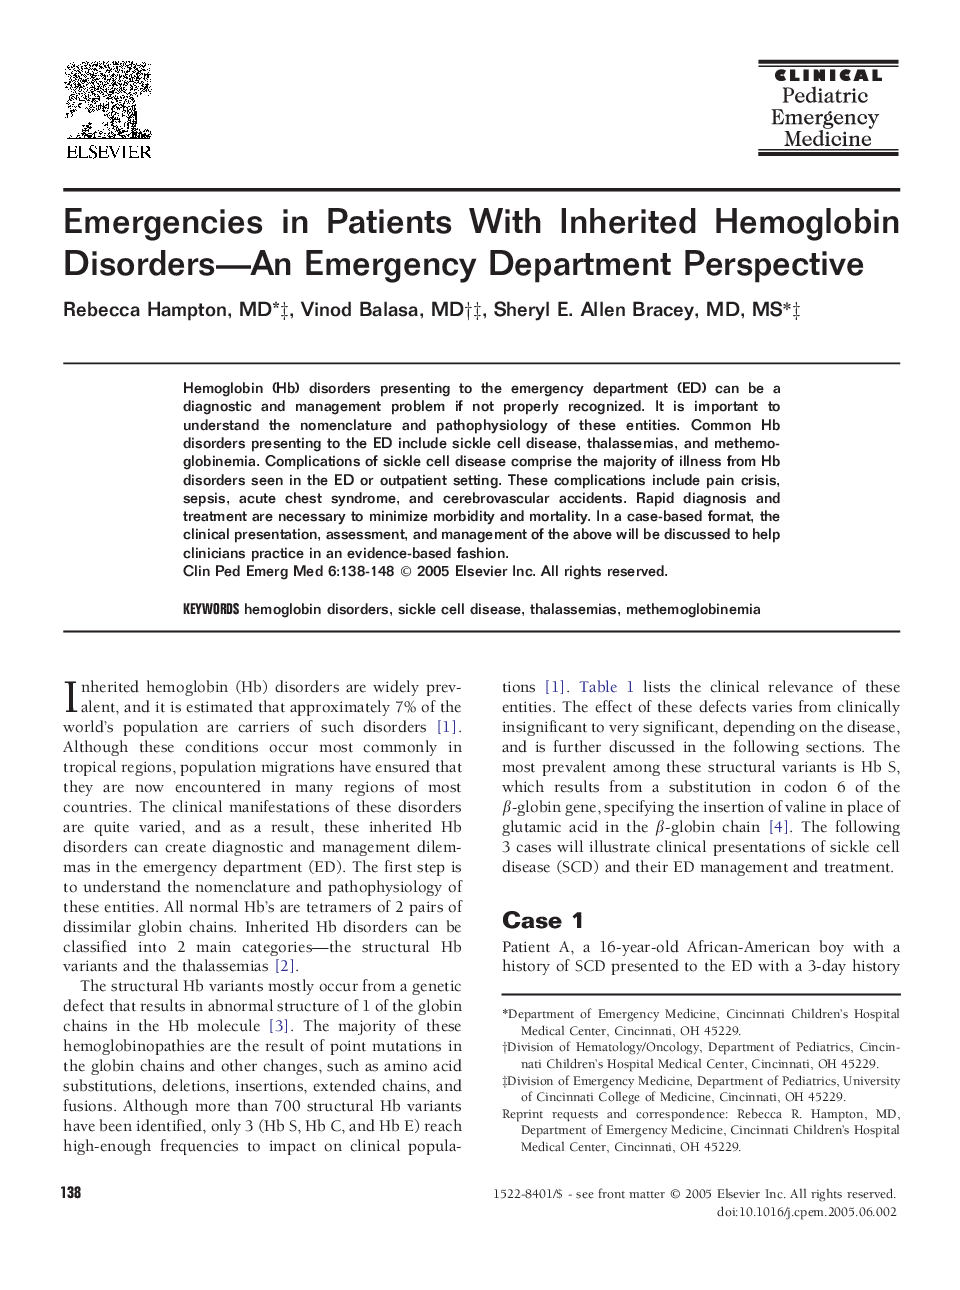 Emergencies in Patients With Inherited Hemoglobin Disorders-An Emergency Department Perspective